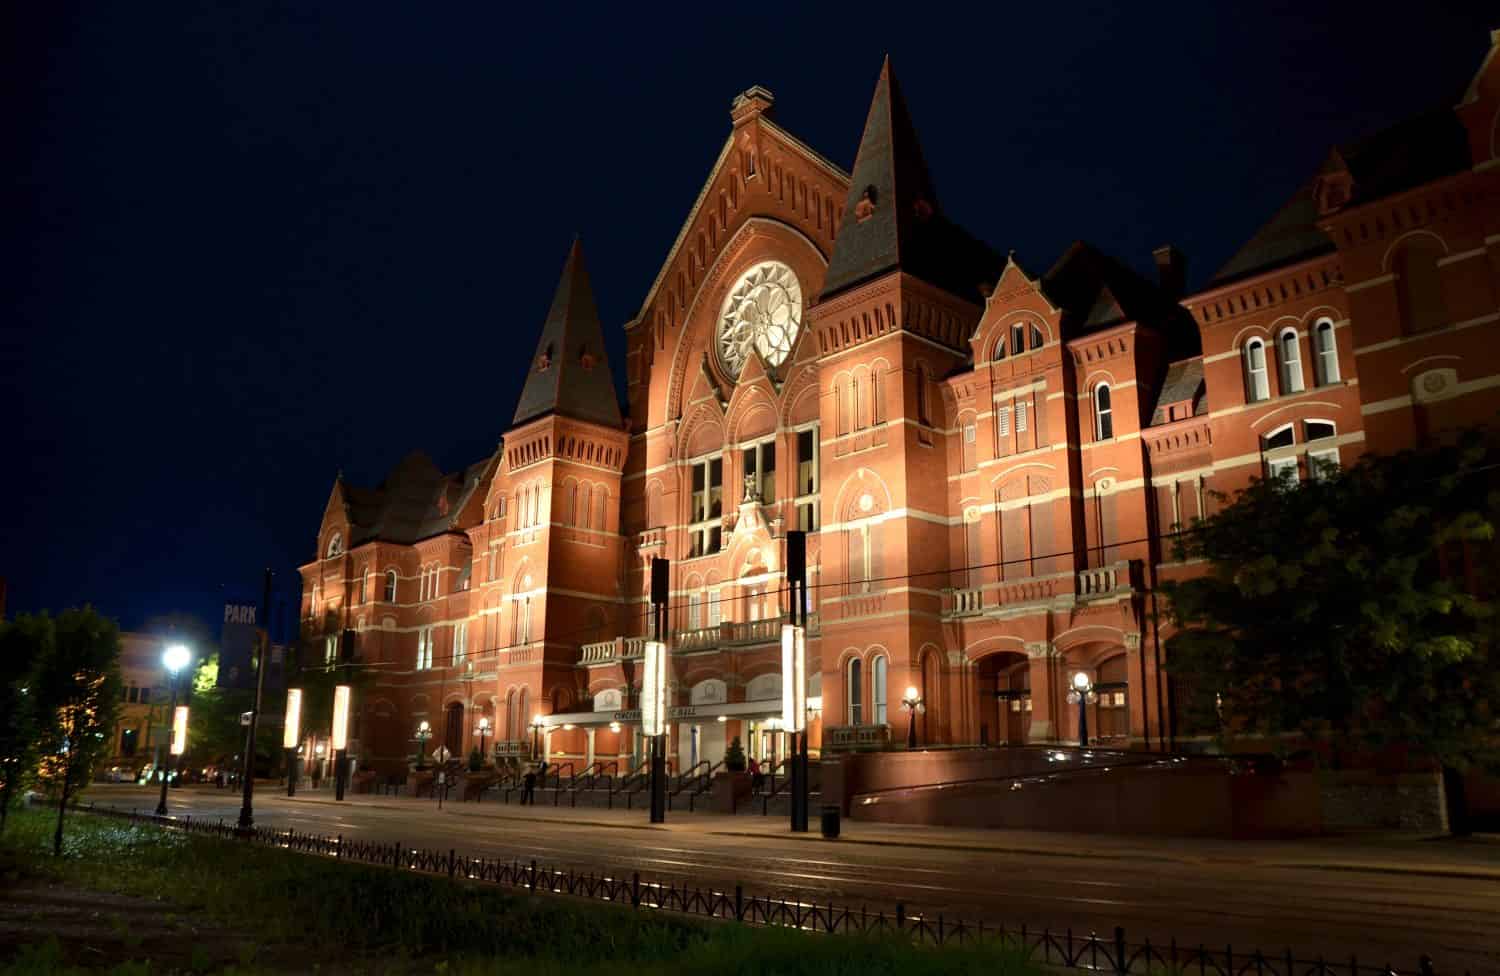 The Cincinnati Music hall spot lighted during the opening night of the spring season